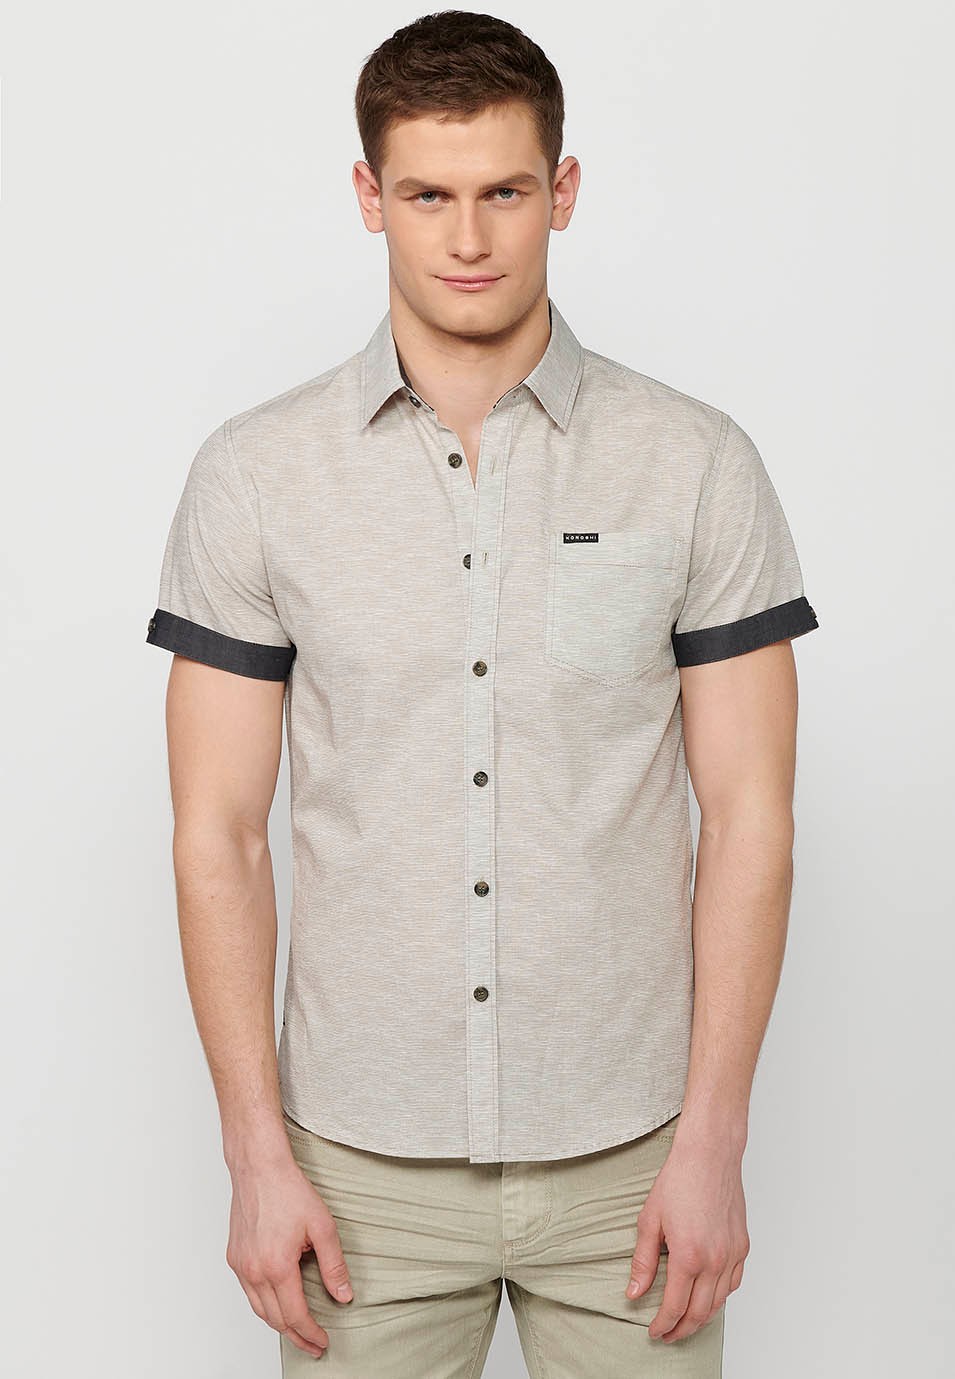 Short-sleeved cotton button-down shirt, gray color for men